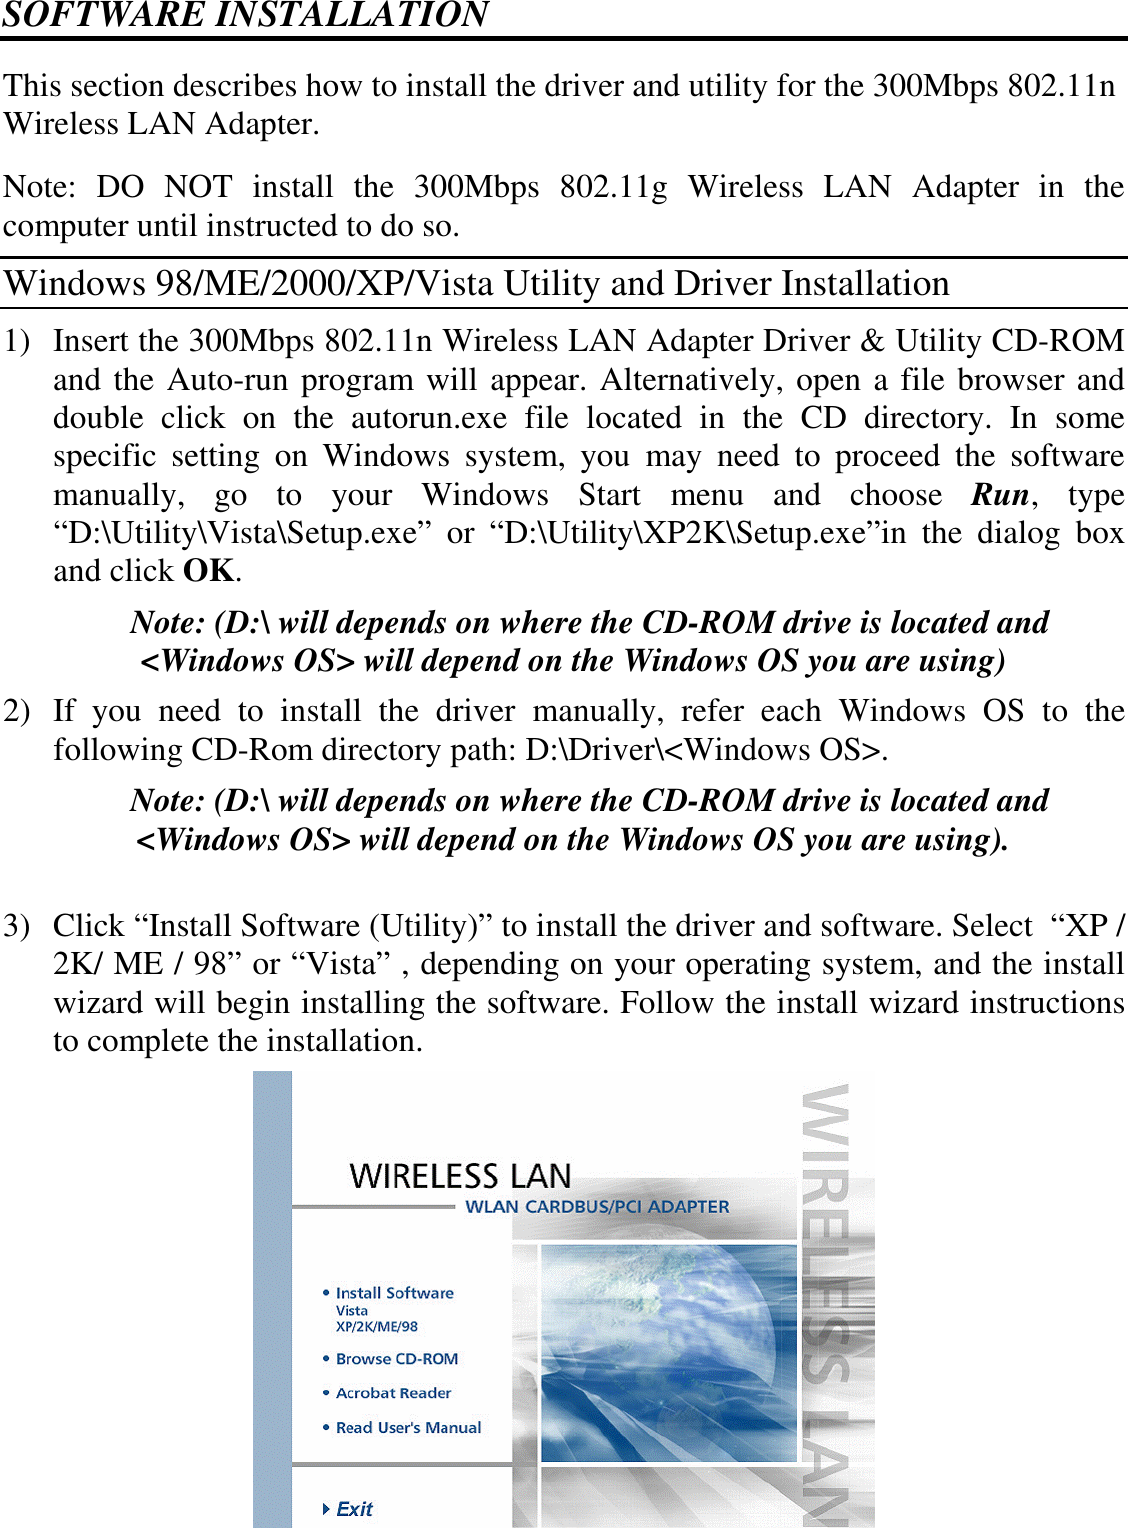  SOFTWARE INSTALLATION This section describes how to install the driver and utility for the 300Mbps 802.11n Wireless LAN Adapter. Note:  DO  NOT  install  the  300Mbps  802.11g  Wireless  LAN  Adapter  in  the computer until instructed to do so. Windows 98/ME/2000/XP/Vista Utility and Driver Installation 1) Insert the 300Mbps 802.11n Wireless LAN Adapter Driver &amp; Utility CD-ROM and the Auto-run program will appear. Alternatively, open a file browser and double  click  on  the  autorun.exe  file  located  in  the  CD  directory.  In  some specific  setting  on  Windows  system,  you  may  need  to  proceed  the  software manually,  go  to  your  Windows  Start  menu  and  choose  Run,  type “D:\Utility\Vista\Setup.exe”  or  “D:\Utility\XP2K\Setup.exe”in  the  dialog  box and click OK. Note: (D:\ will depends on where the CD-ROM drive is located and &lt;Windows OS&gt; will depend on the Windows OS you are using) 2) If  you  need  to  install  the  driver  manually,  refer  each  Windows  OS  to  the following CD-Rom directory path: D:\Driver\&lt;Windows OS&gt;. Note: (D:\ will depends on where the CD-ROM drive is located and &lt;Windows OS&gt; will depend on the Windows OS you are using).  3) Click “Install Software (Utility)” to install the driver and software. Select  “XP / 2K/ ME / 98” or “Vista” , depending on your operating system, and the install wizard will begin installing the software. Follow the install wizard instructions to complete the installation.   